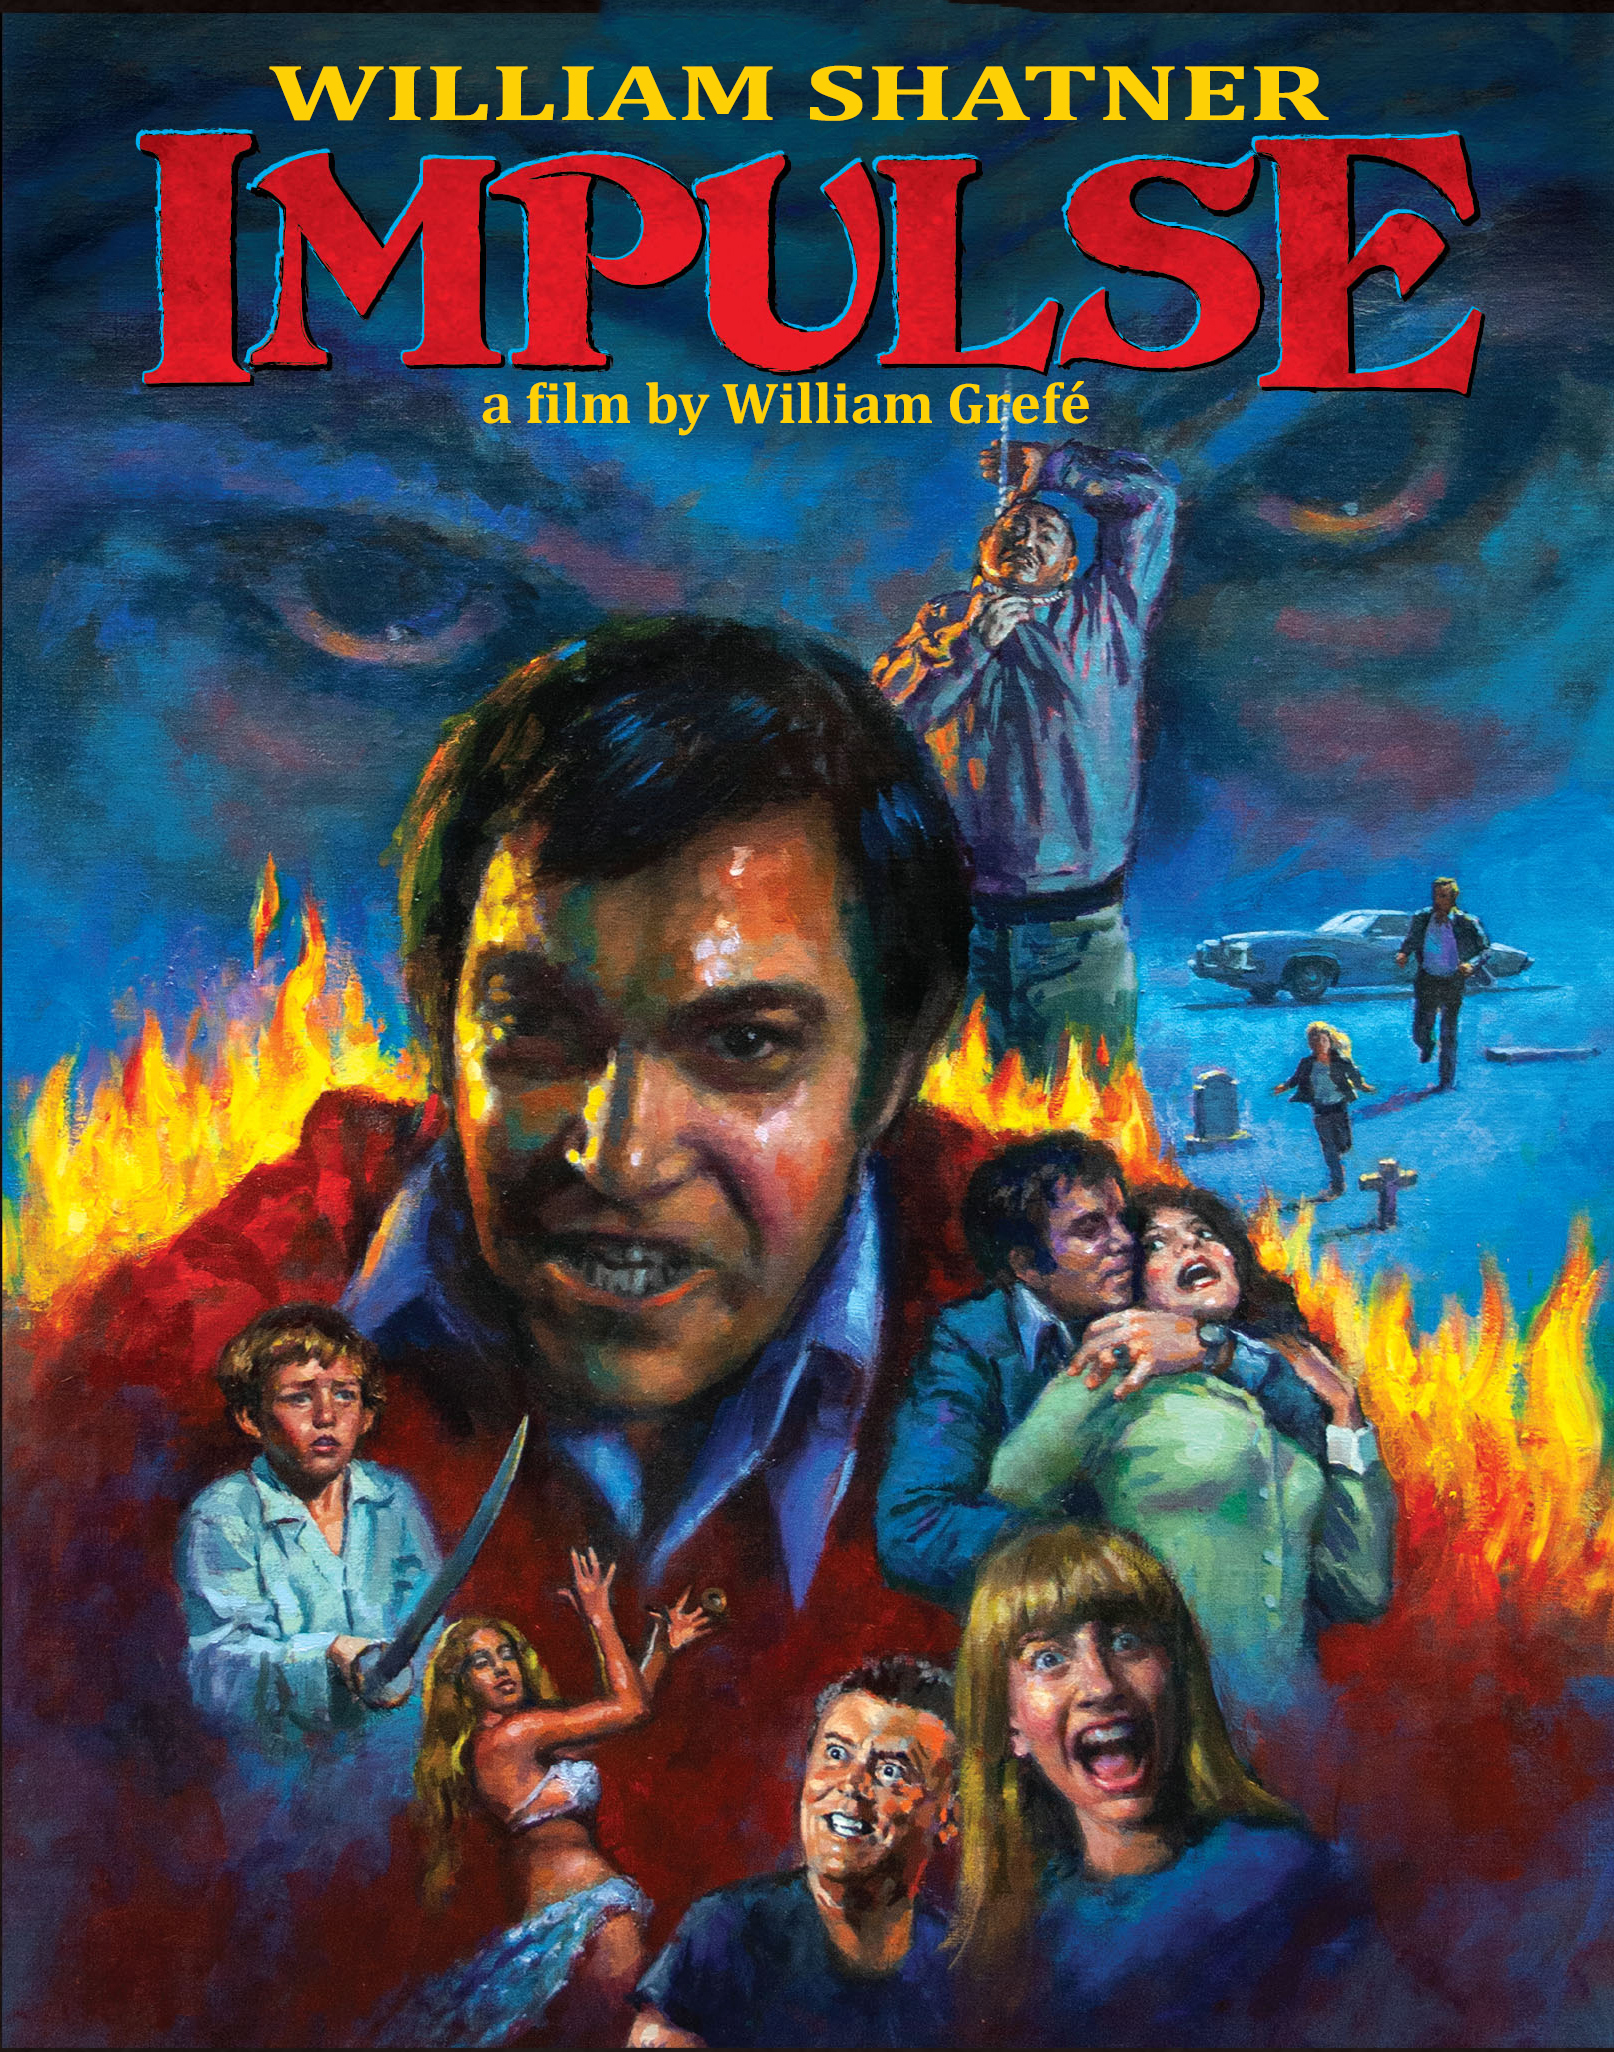 Pre-Order Now: IMPULSE (1974) 2 Disc Blu-Ray set – Special Collector’s Edition, ONLY 2000 UNITS!